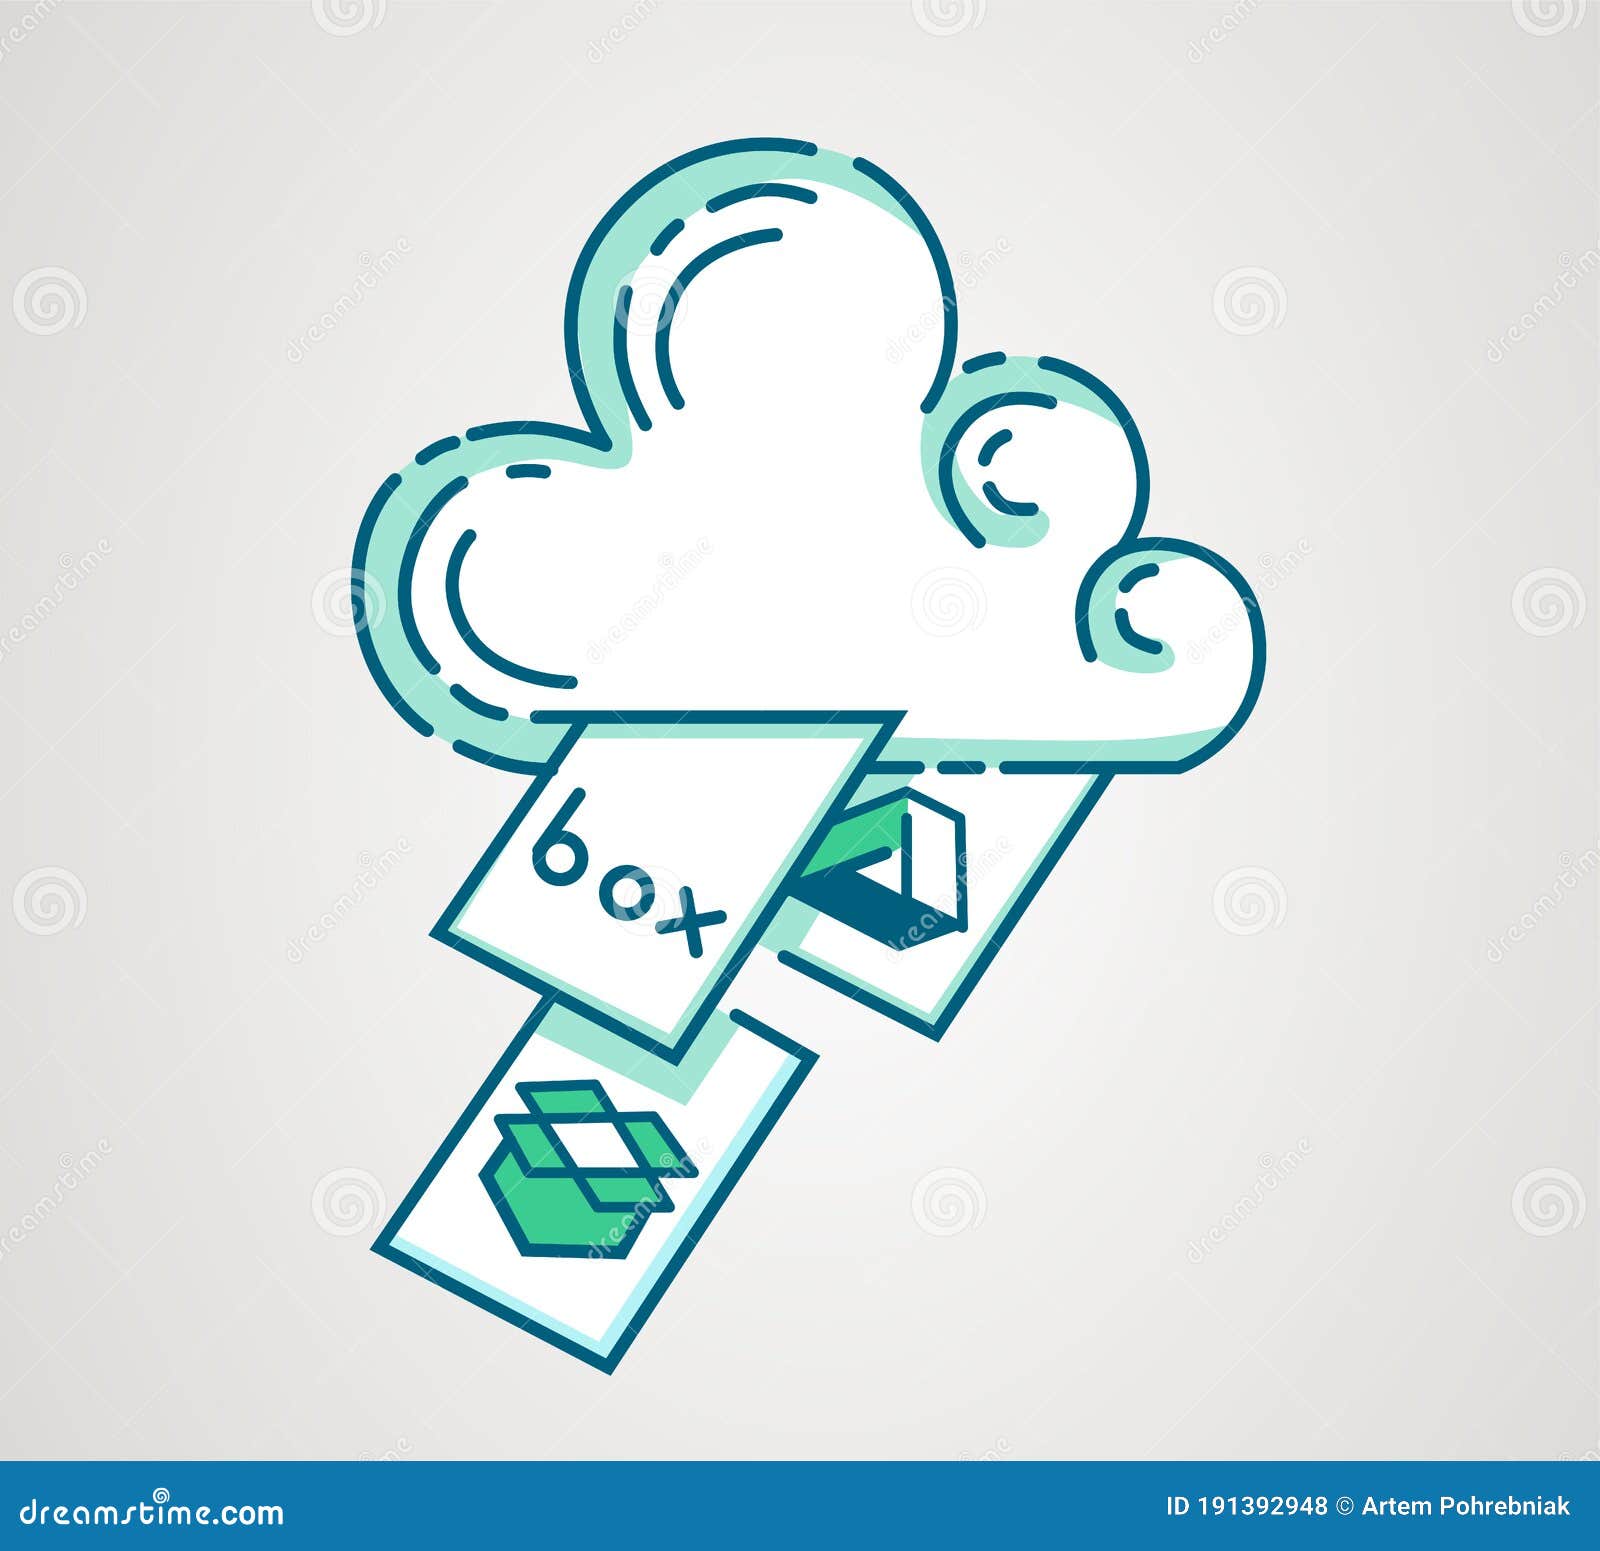 cloud storage logo. file repository icon. hosting service banner. synchronize documents. hand drawn .  